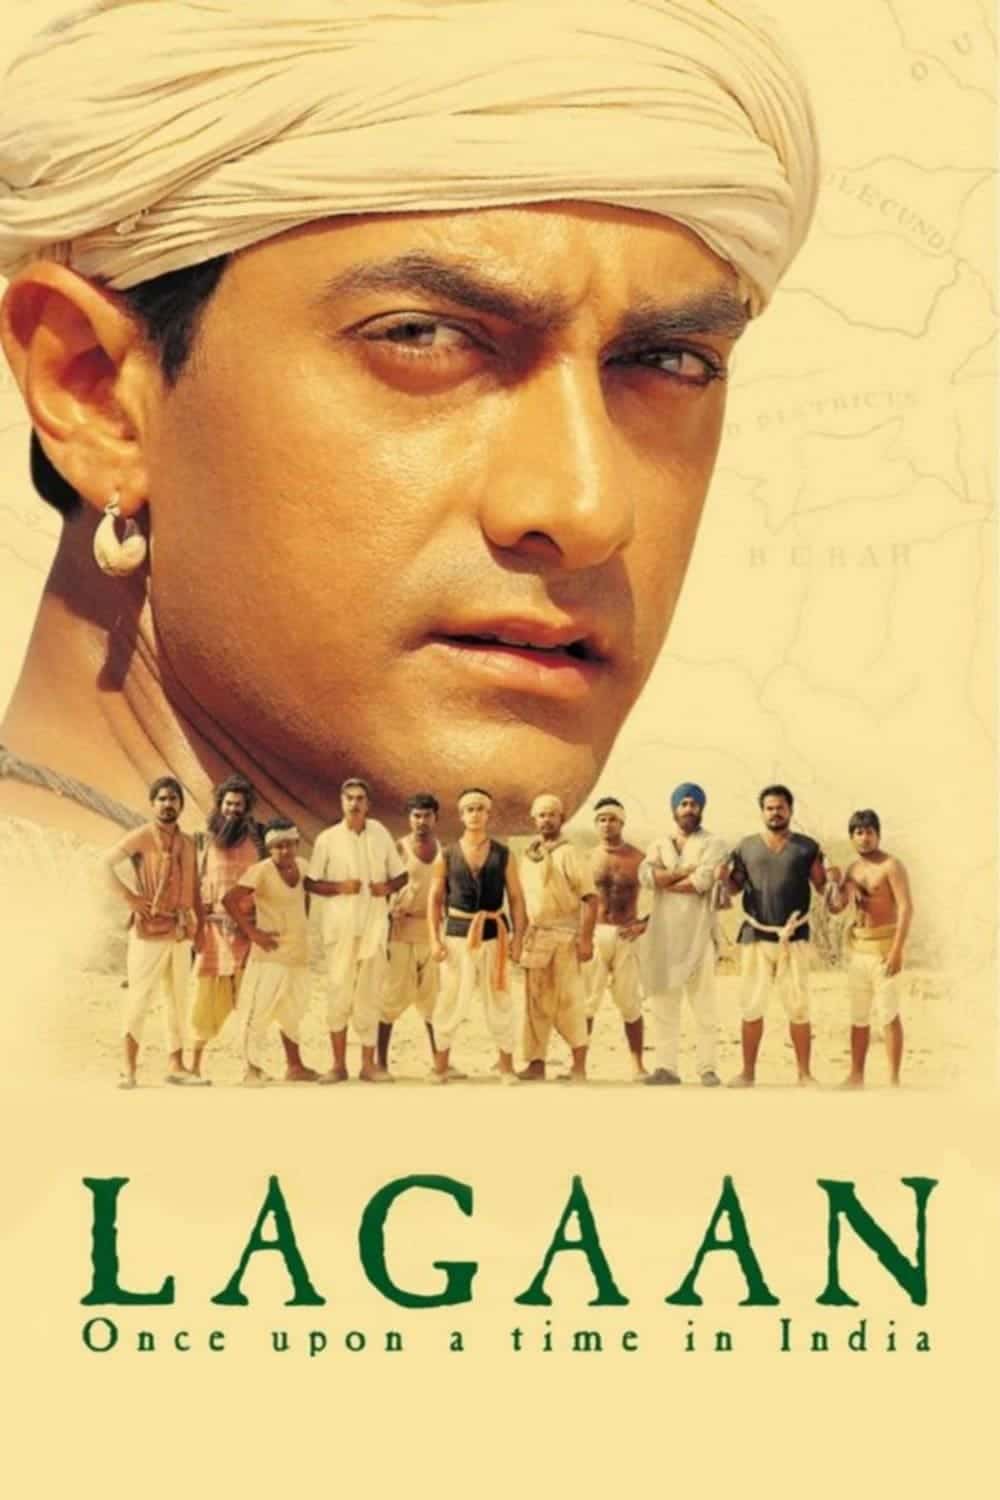 Poster for the movie "Lagaan: Once Upon a Time in India"